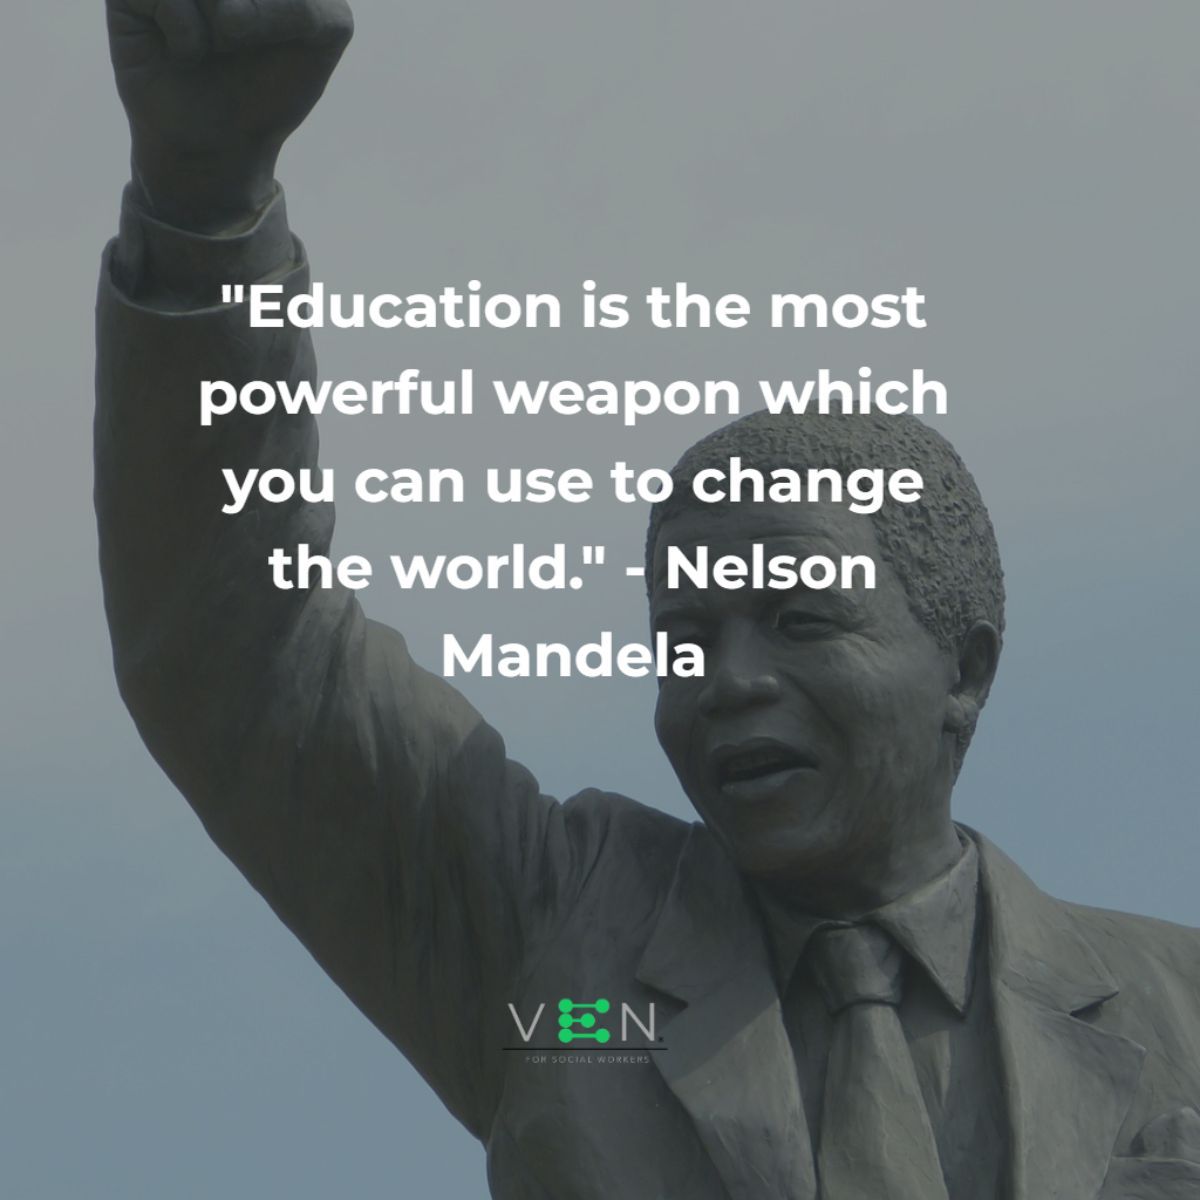 💚 Empowerment begins in the classroom. Educators, you wield the key to change, molding futures and igniting minds. Your dedication shapes a world of possibilities. #TeachWithHeart 💚 📚 #EducationTransforms #TheVEN #CaringClassrooms